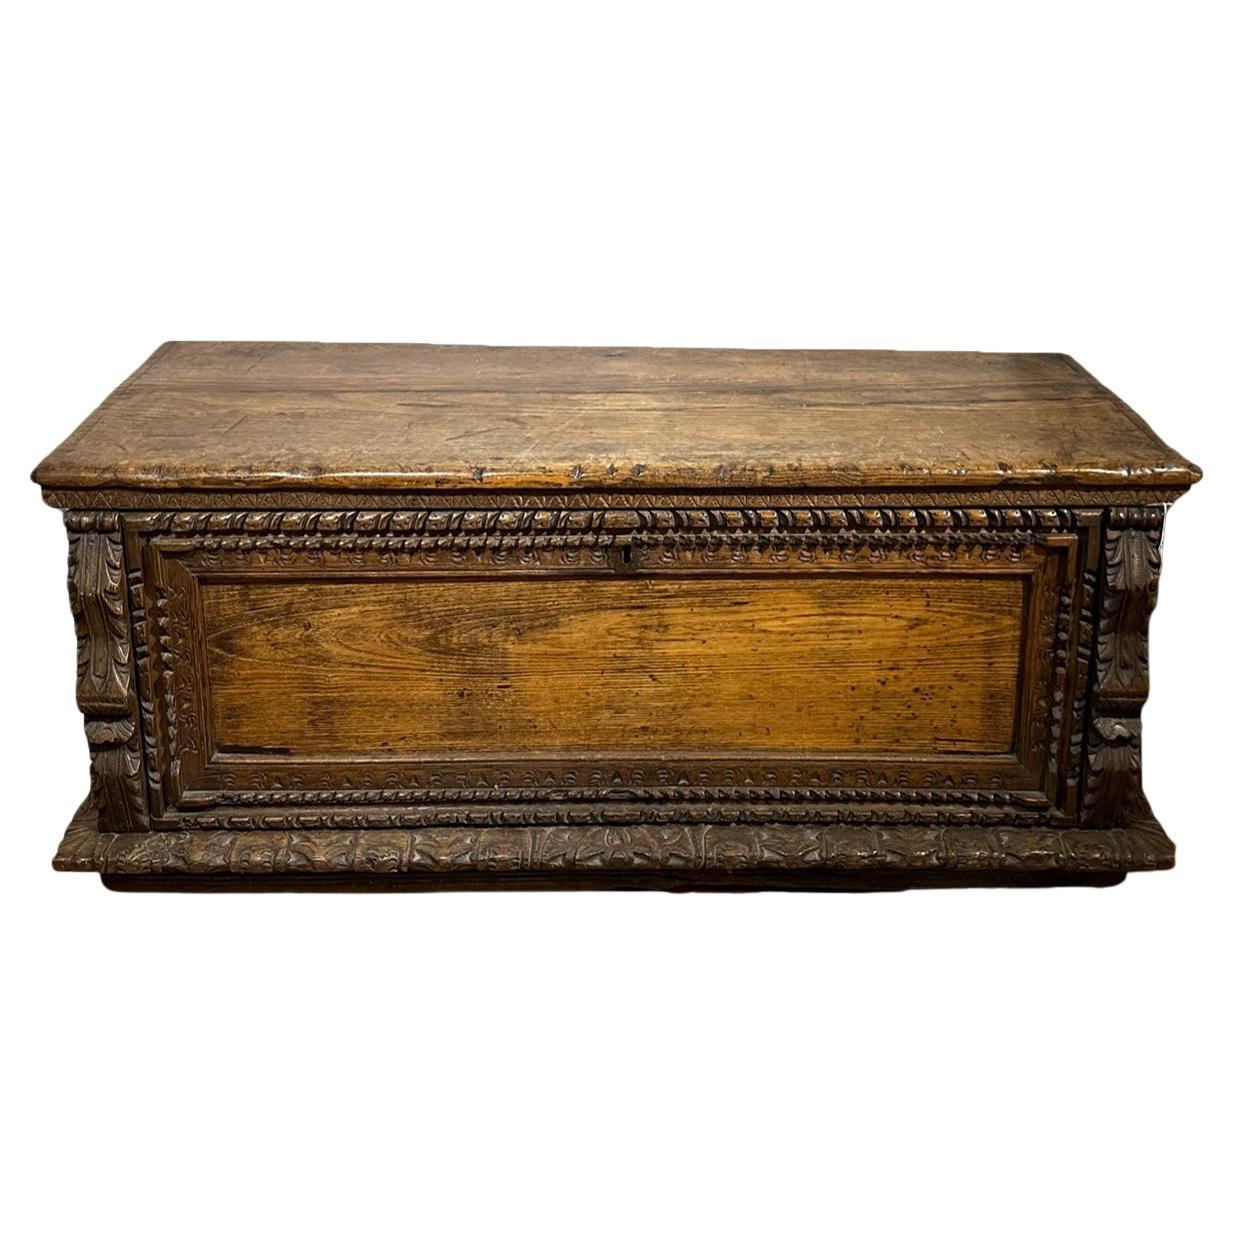 SECOND HALF OF THE 16th CENTURY CHESTNUT CHEST  For Sale